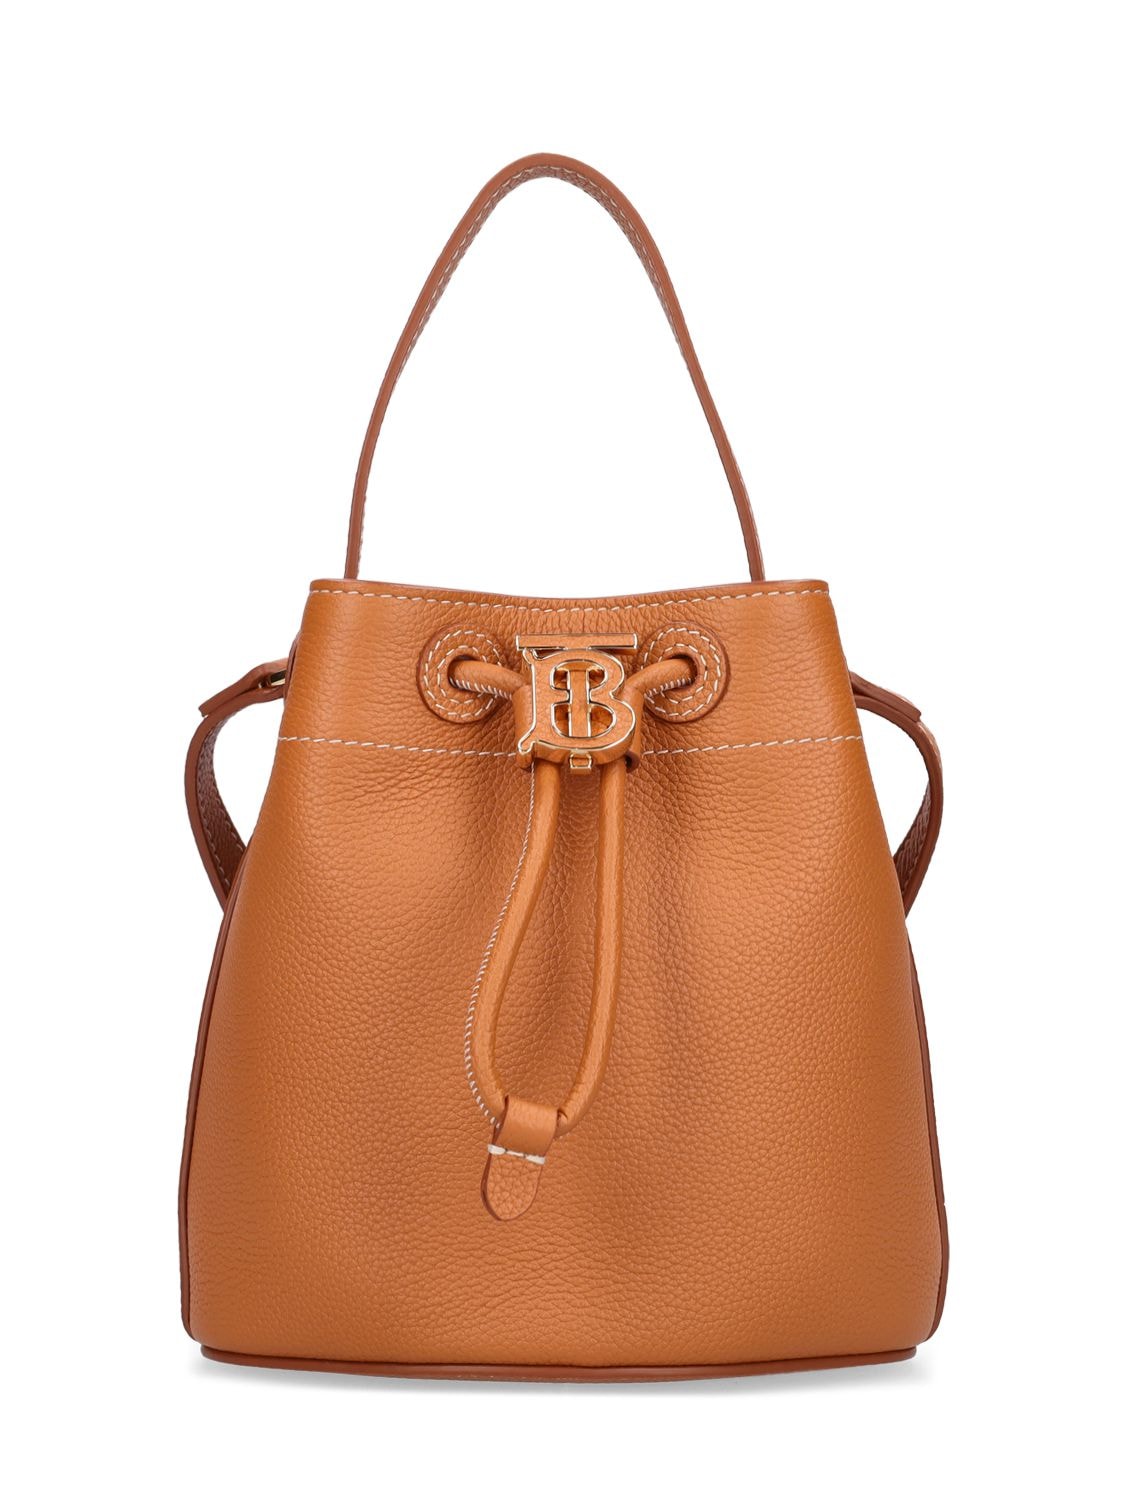 Burberry Mini Leather Bucket Bag In Warm Russet Brown